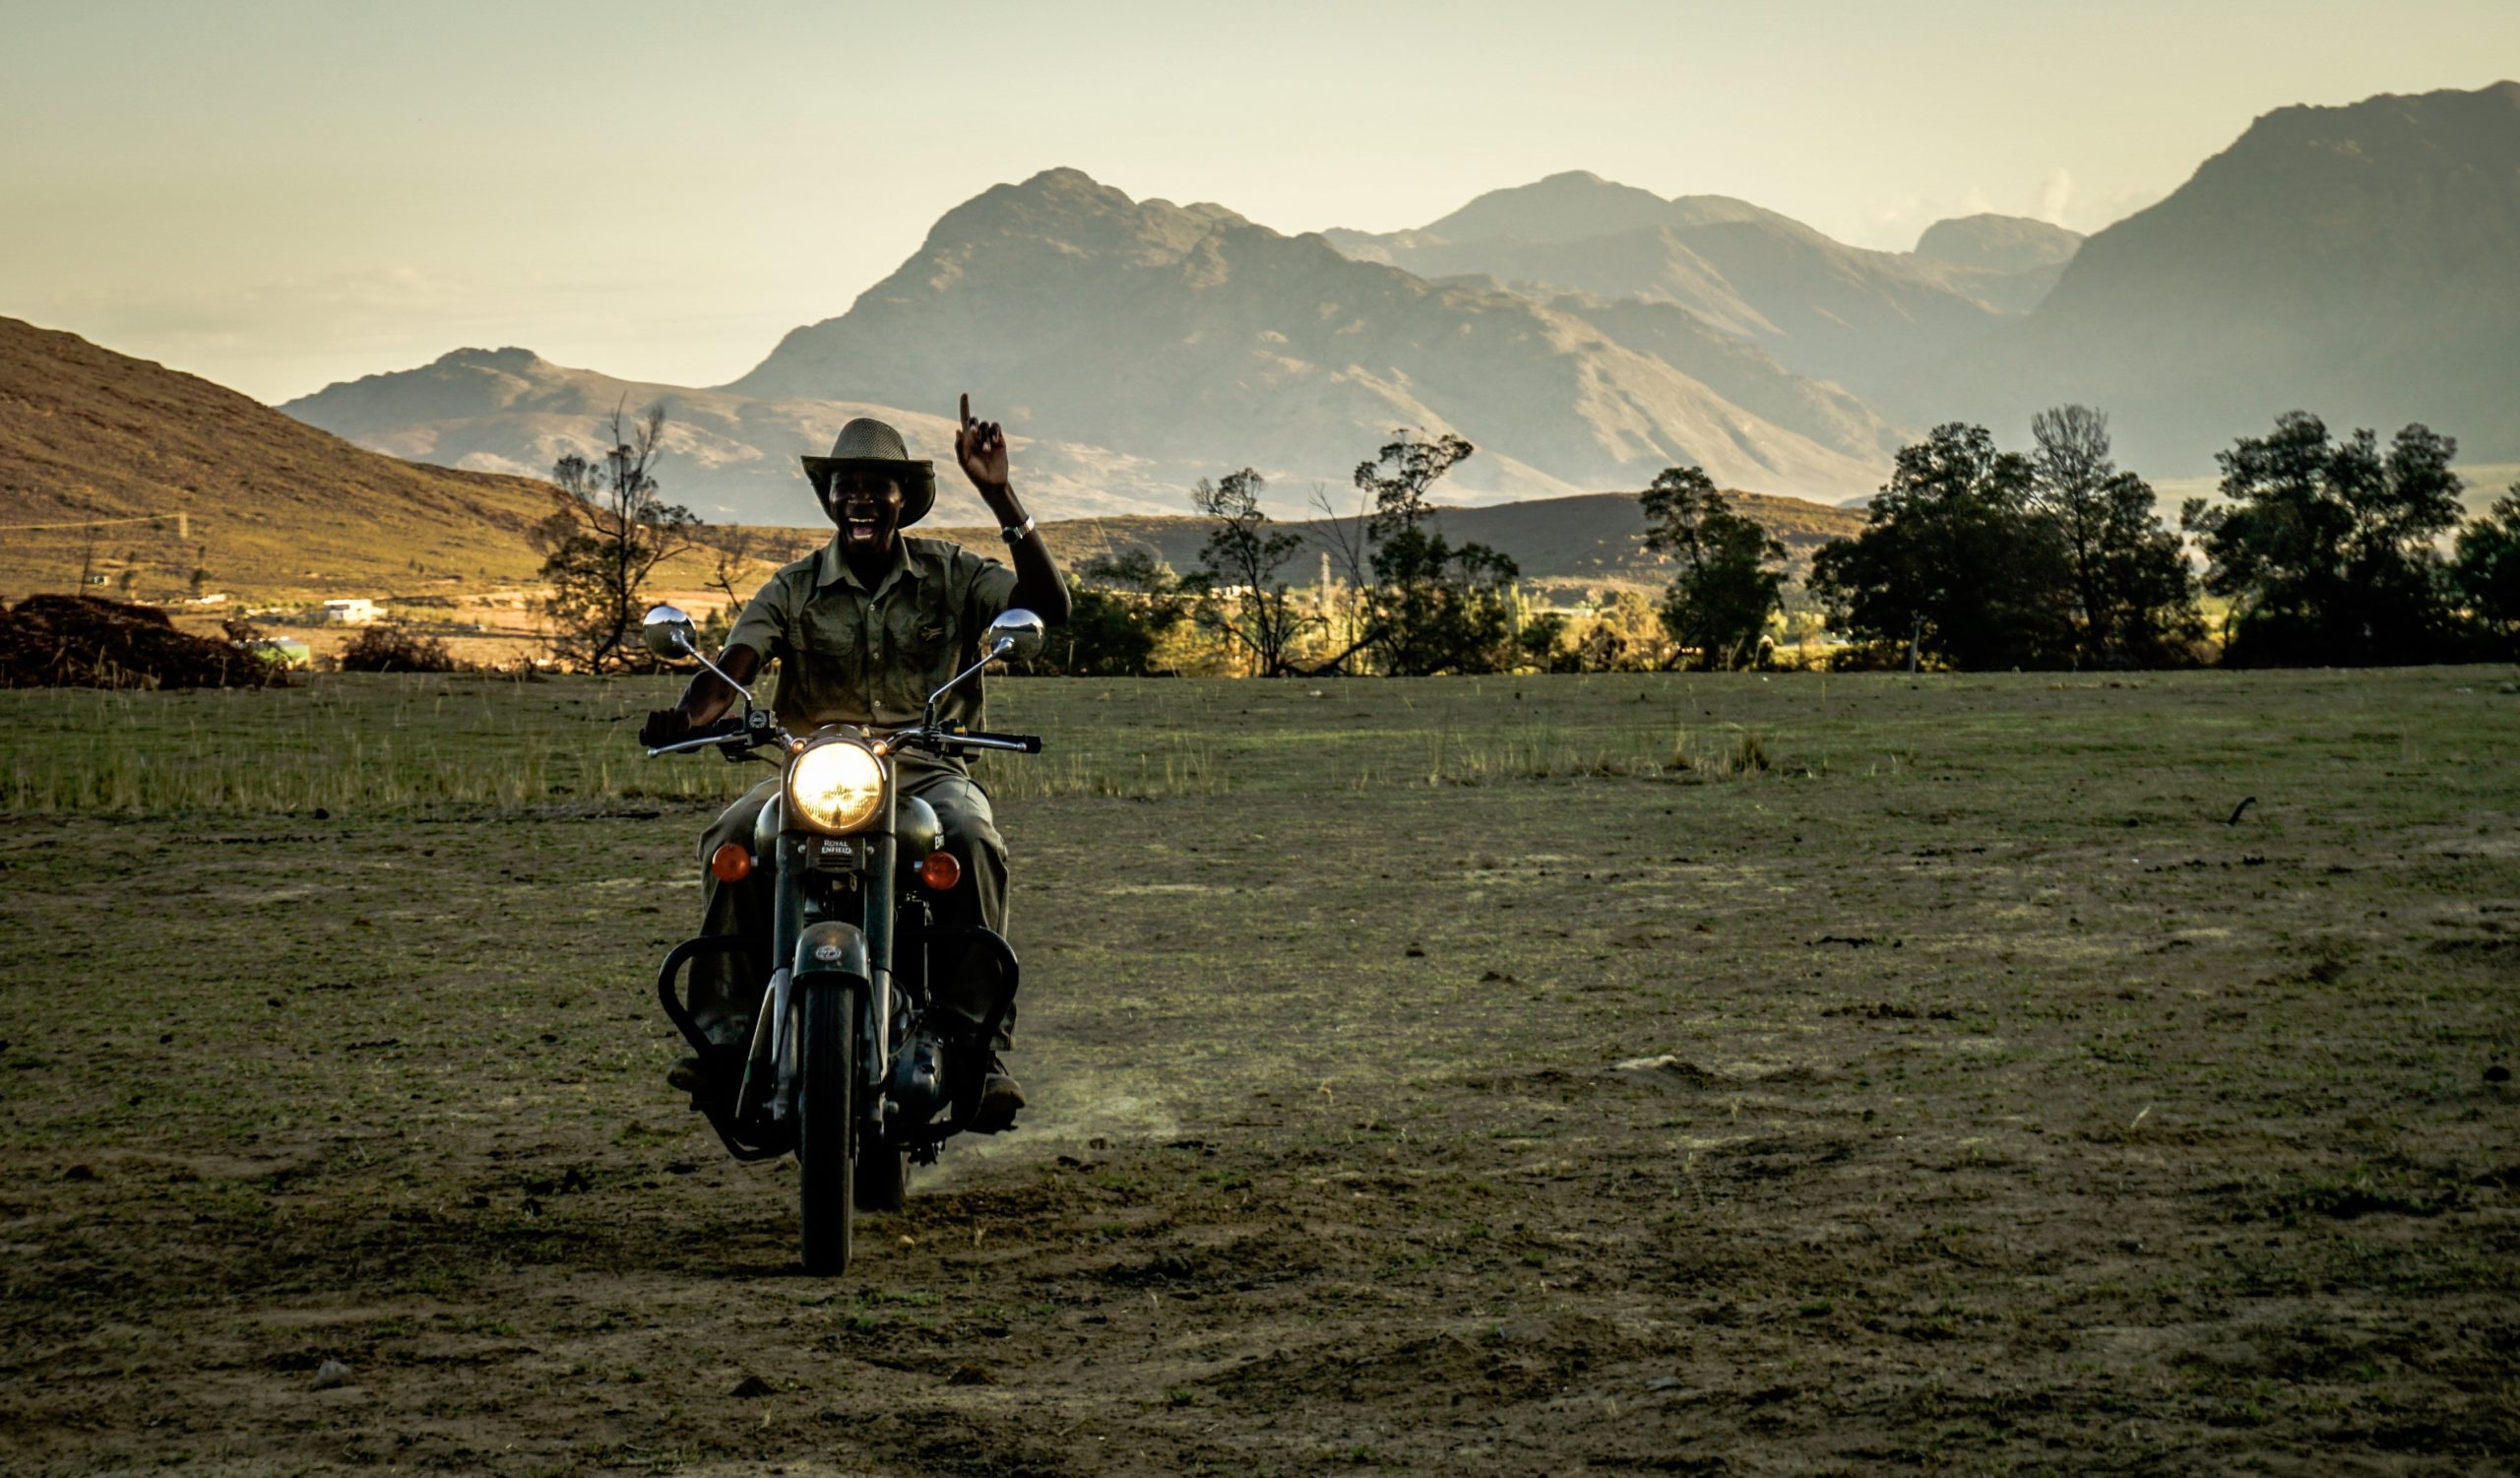 Touring South Africa in safety - Motorbike Writer